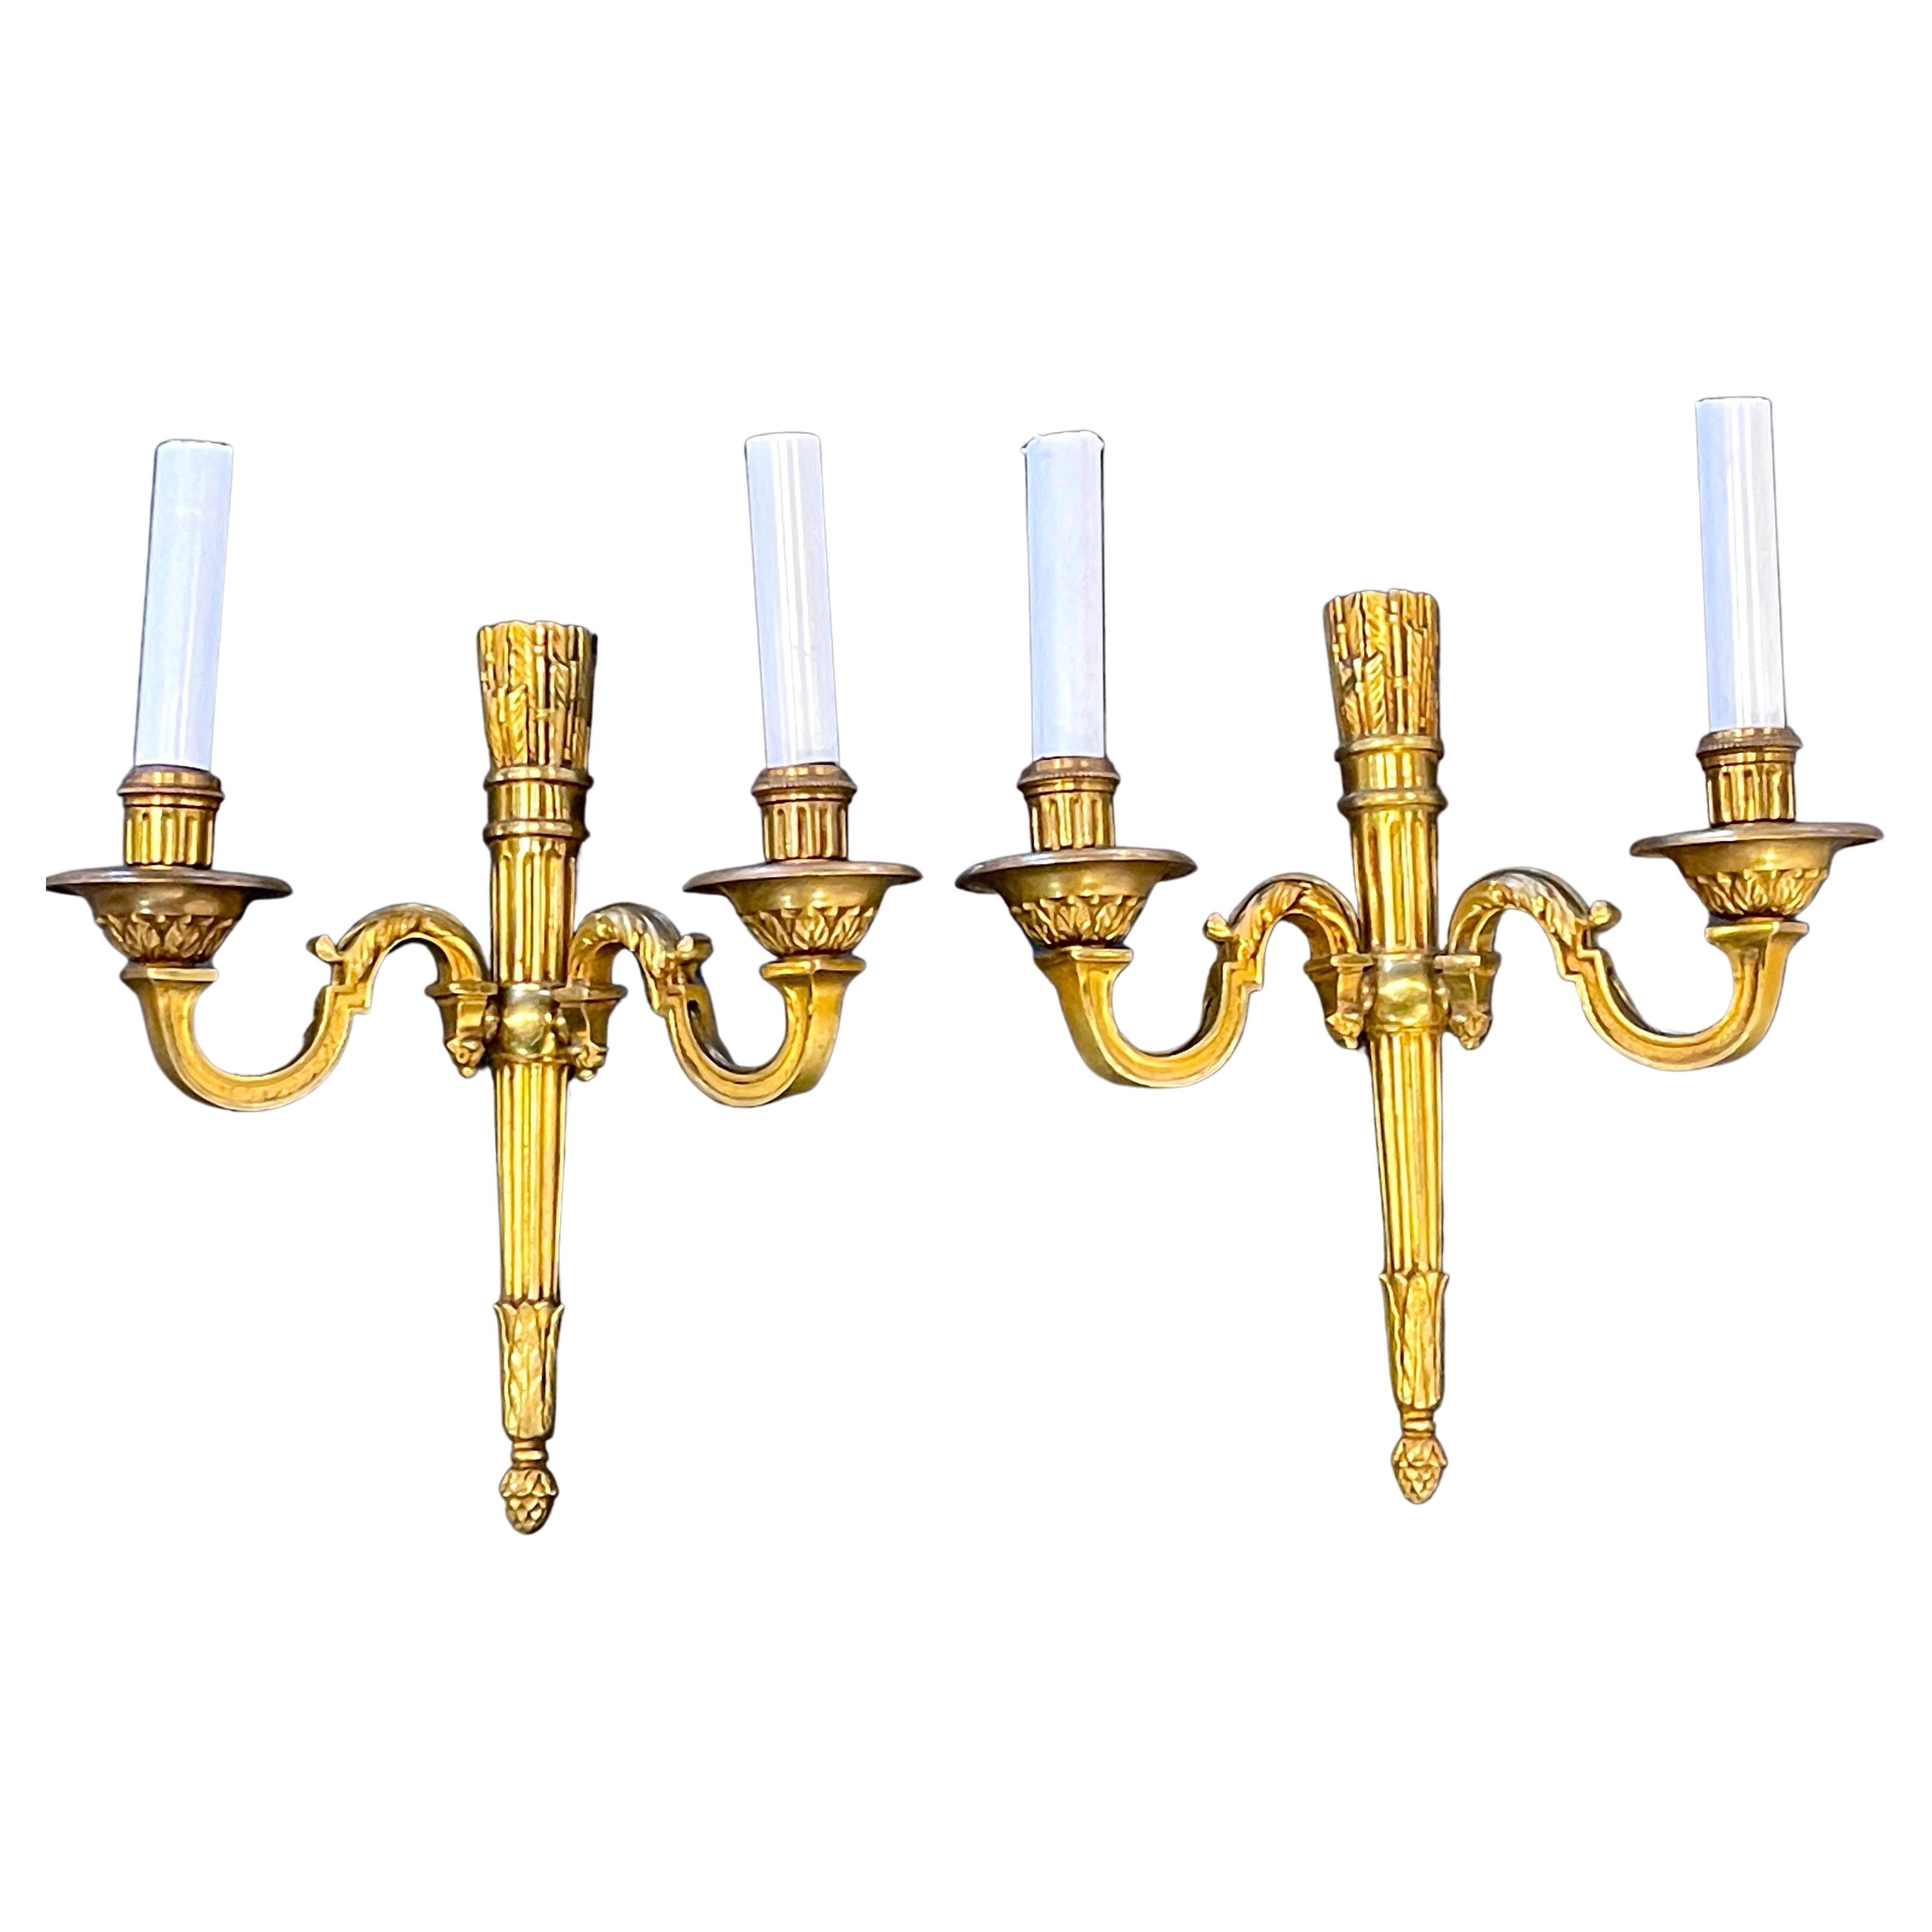 Pair of Late 19th Century French Ormolu Neoclassical, Regence Stye Sconces 